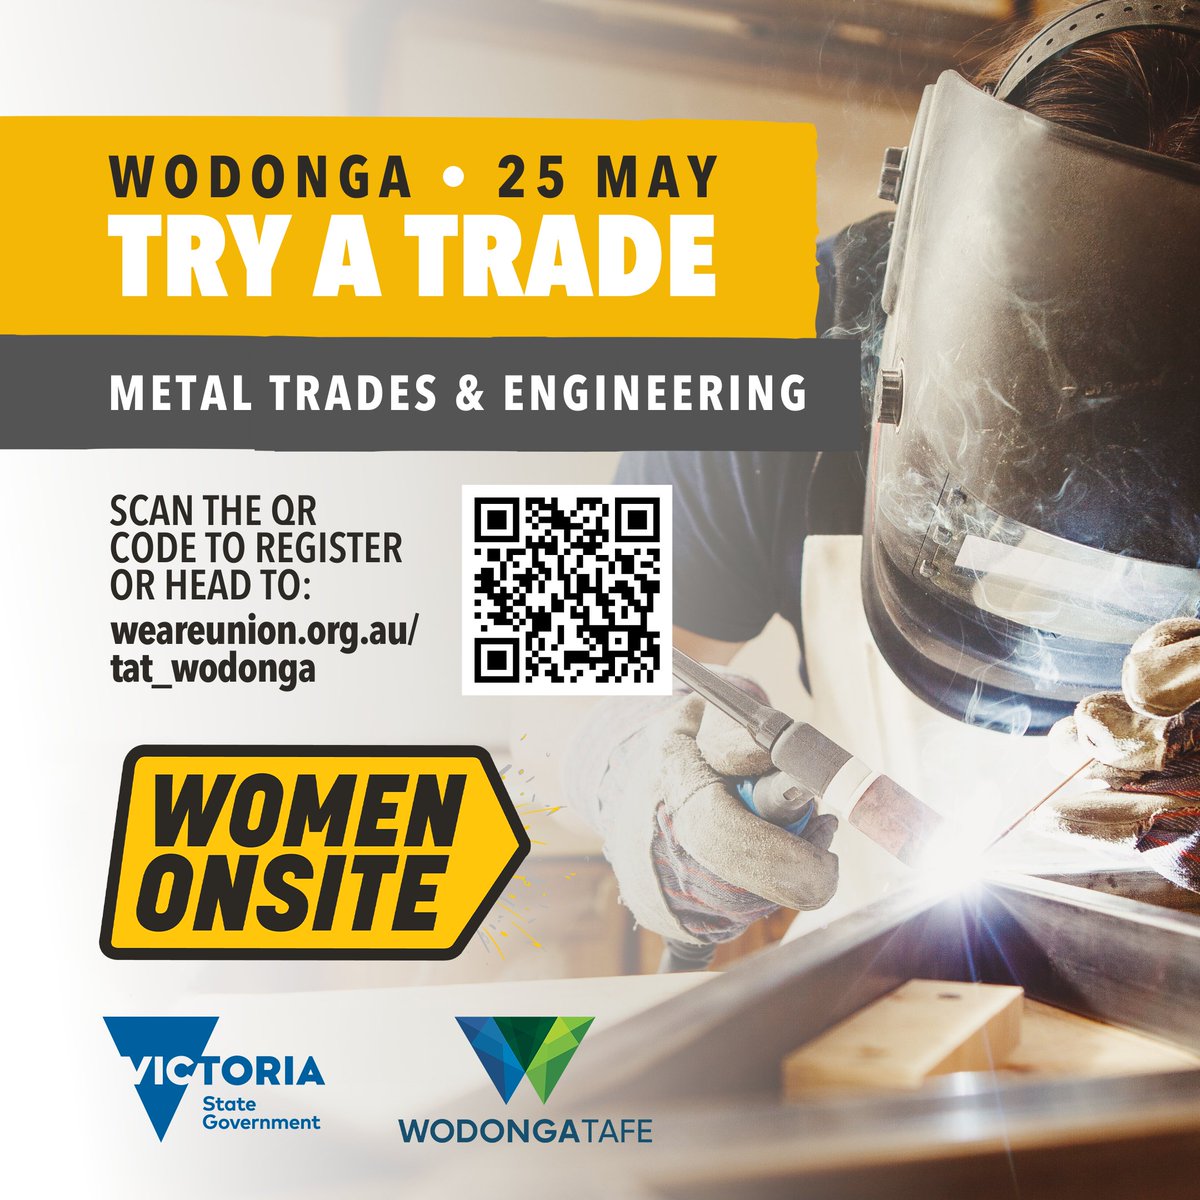 Looking for a career change? Want to get out of the office and work with your hands? Curious about metal trades and engineering? Women Onsite are excited to announce a Try a Trade Day with Wodonga TAFE. Register here: ow.ly/SIp050Rvi7l